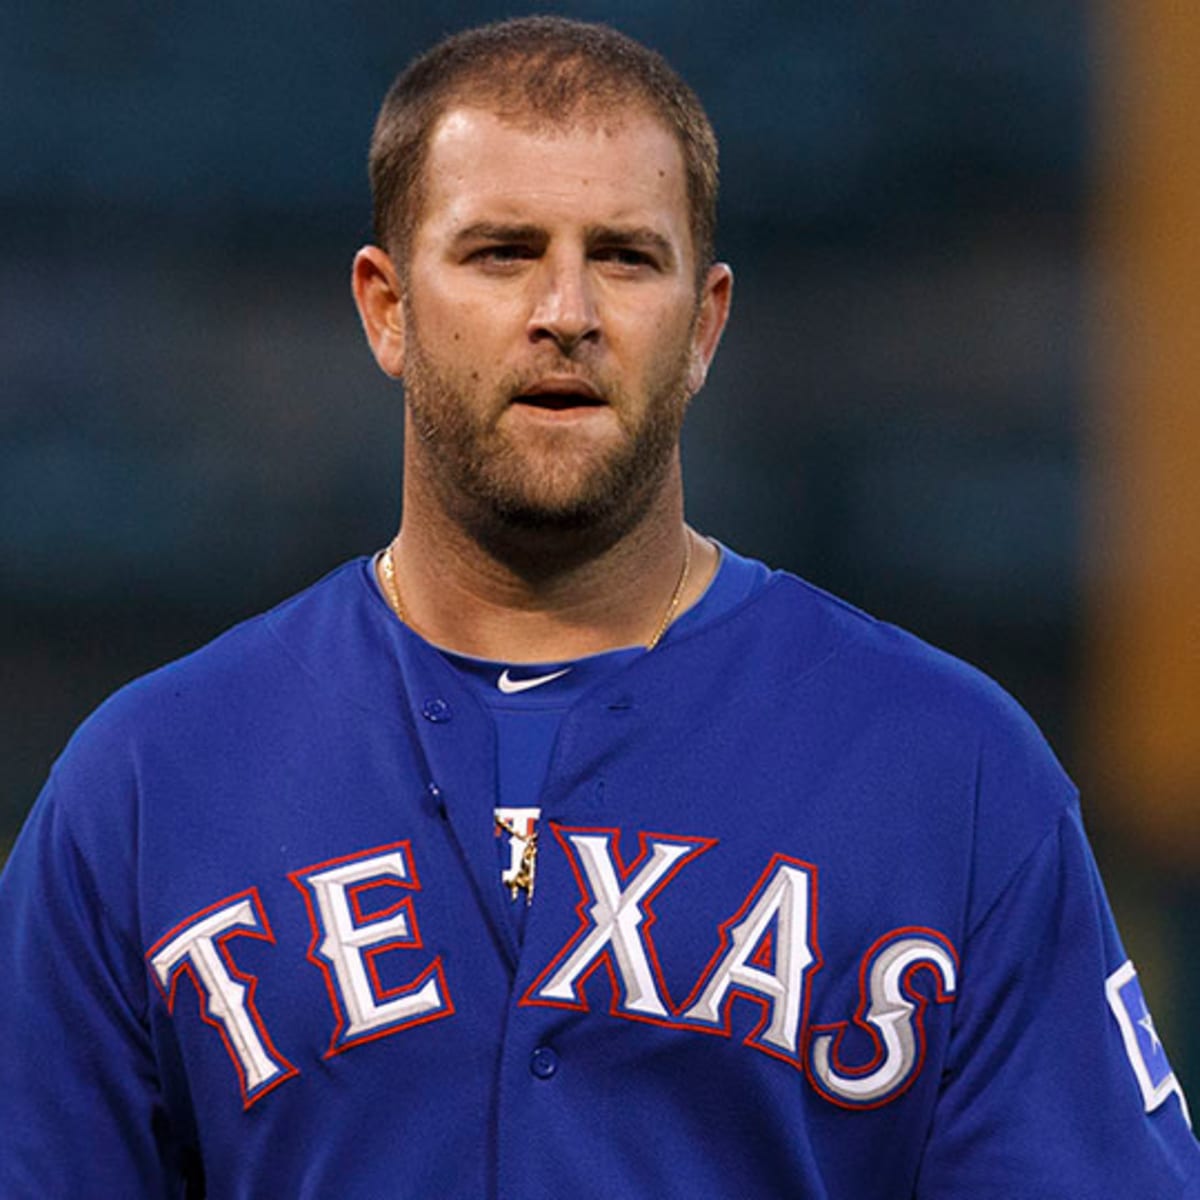 Texas Rangers: Could Mike Napoli Be Traded At The Deadline?